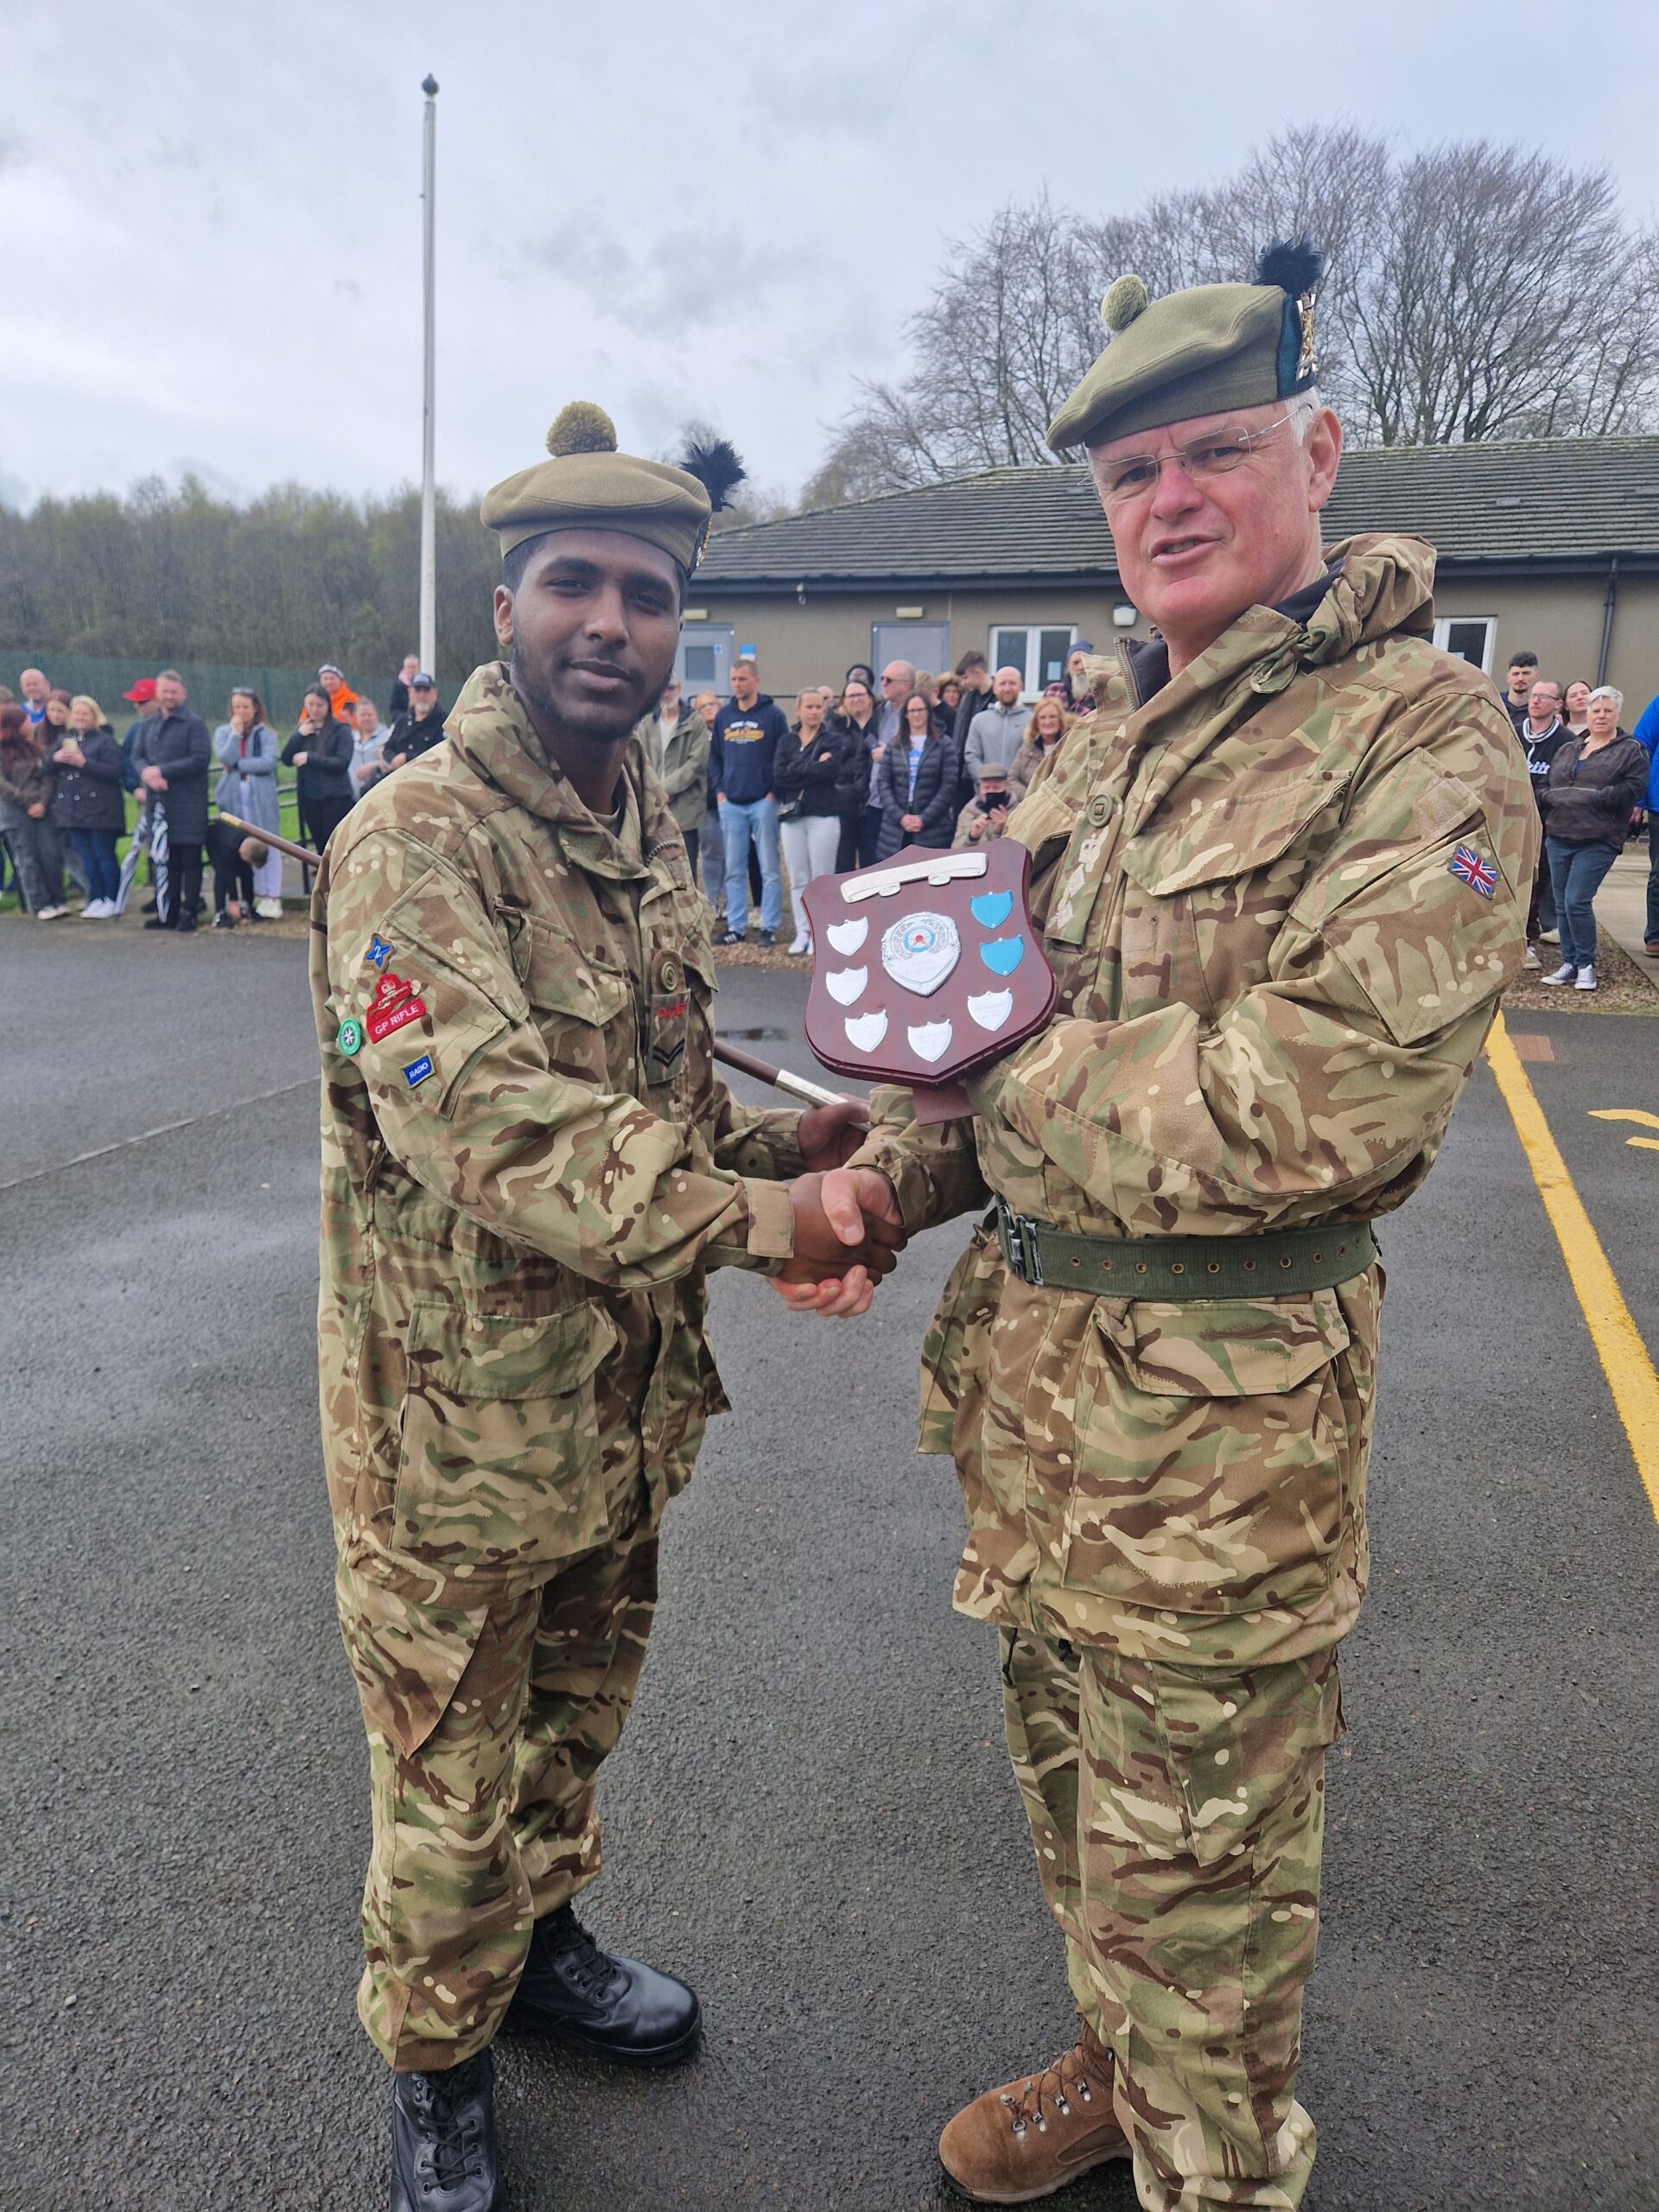 Trophy presentations taking place after the Lothian & Borders 3 star cadre, with a CFAV presenting a shield trophy to and shaking hands with a male Cadet